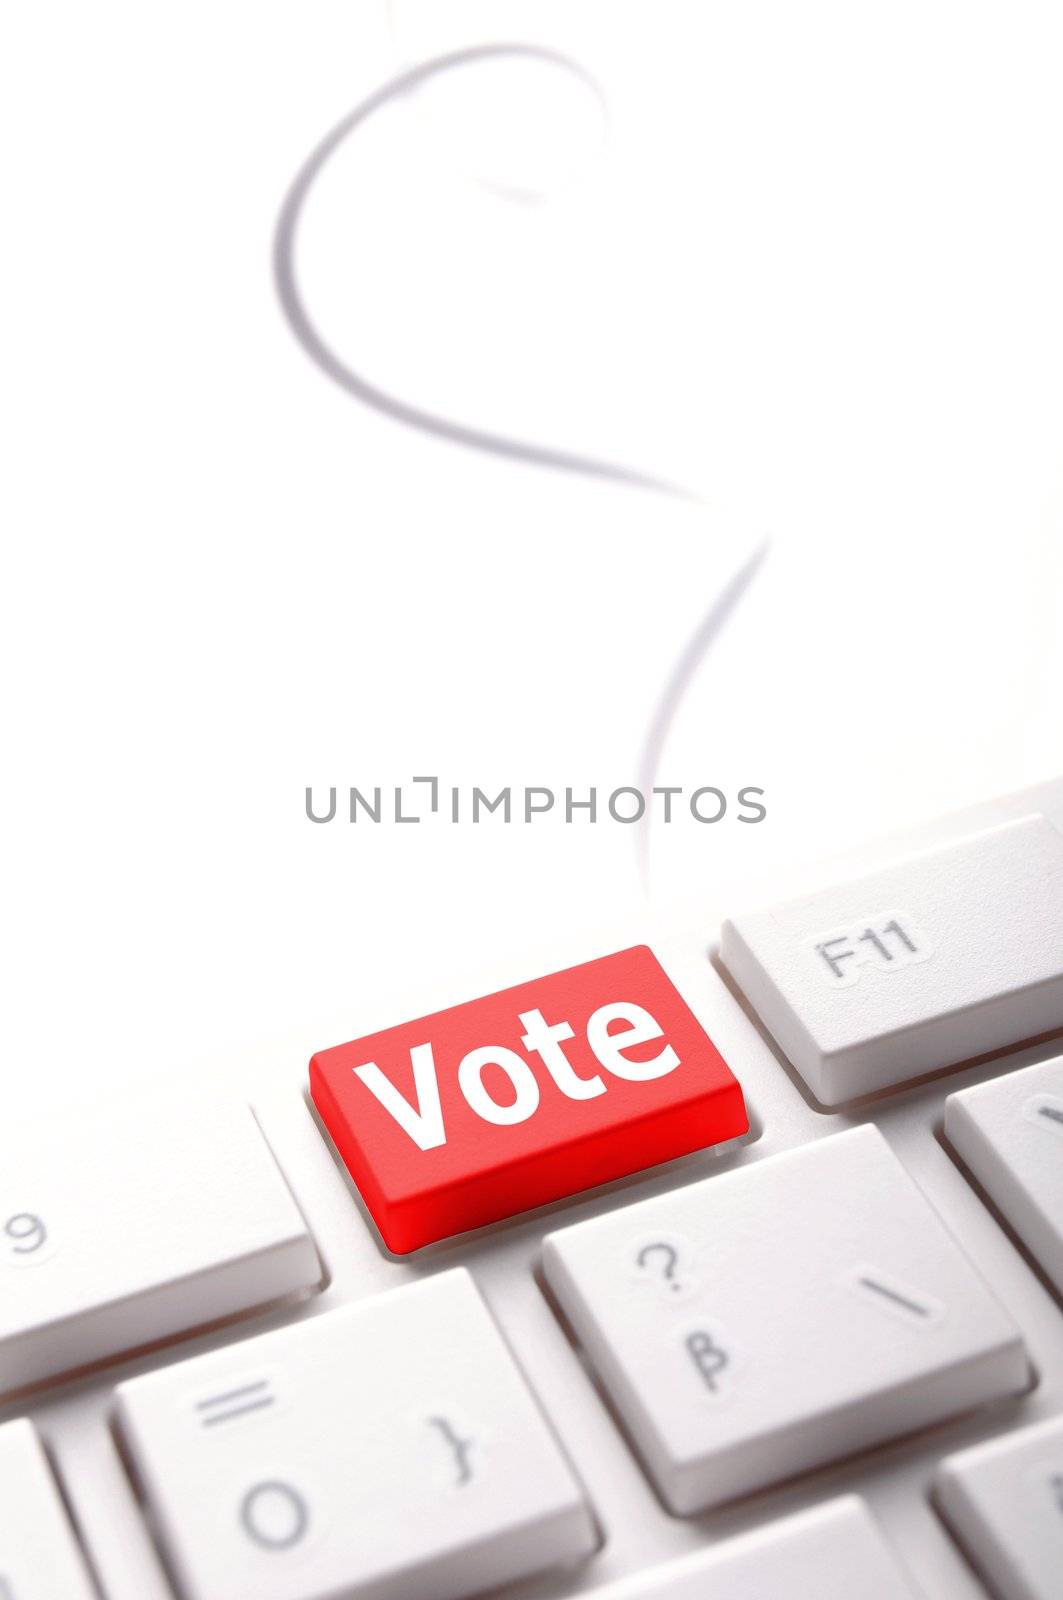 vote word on key or keyboard showing election concept